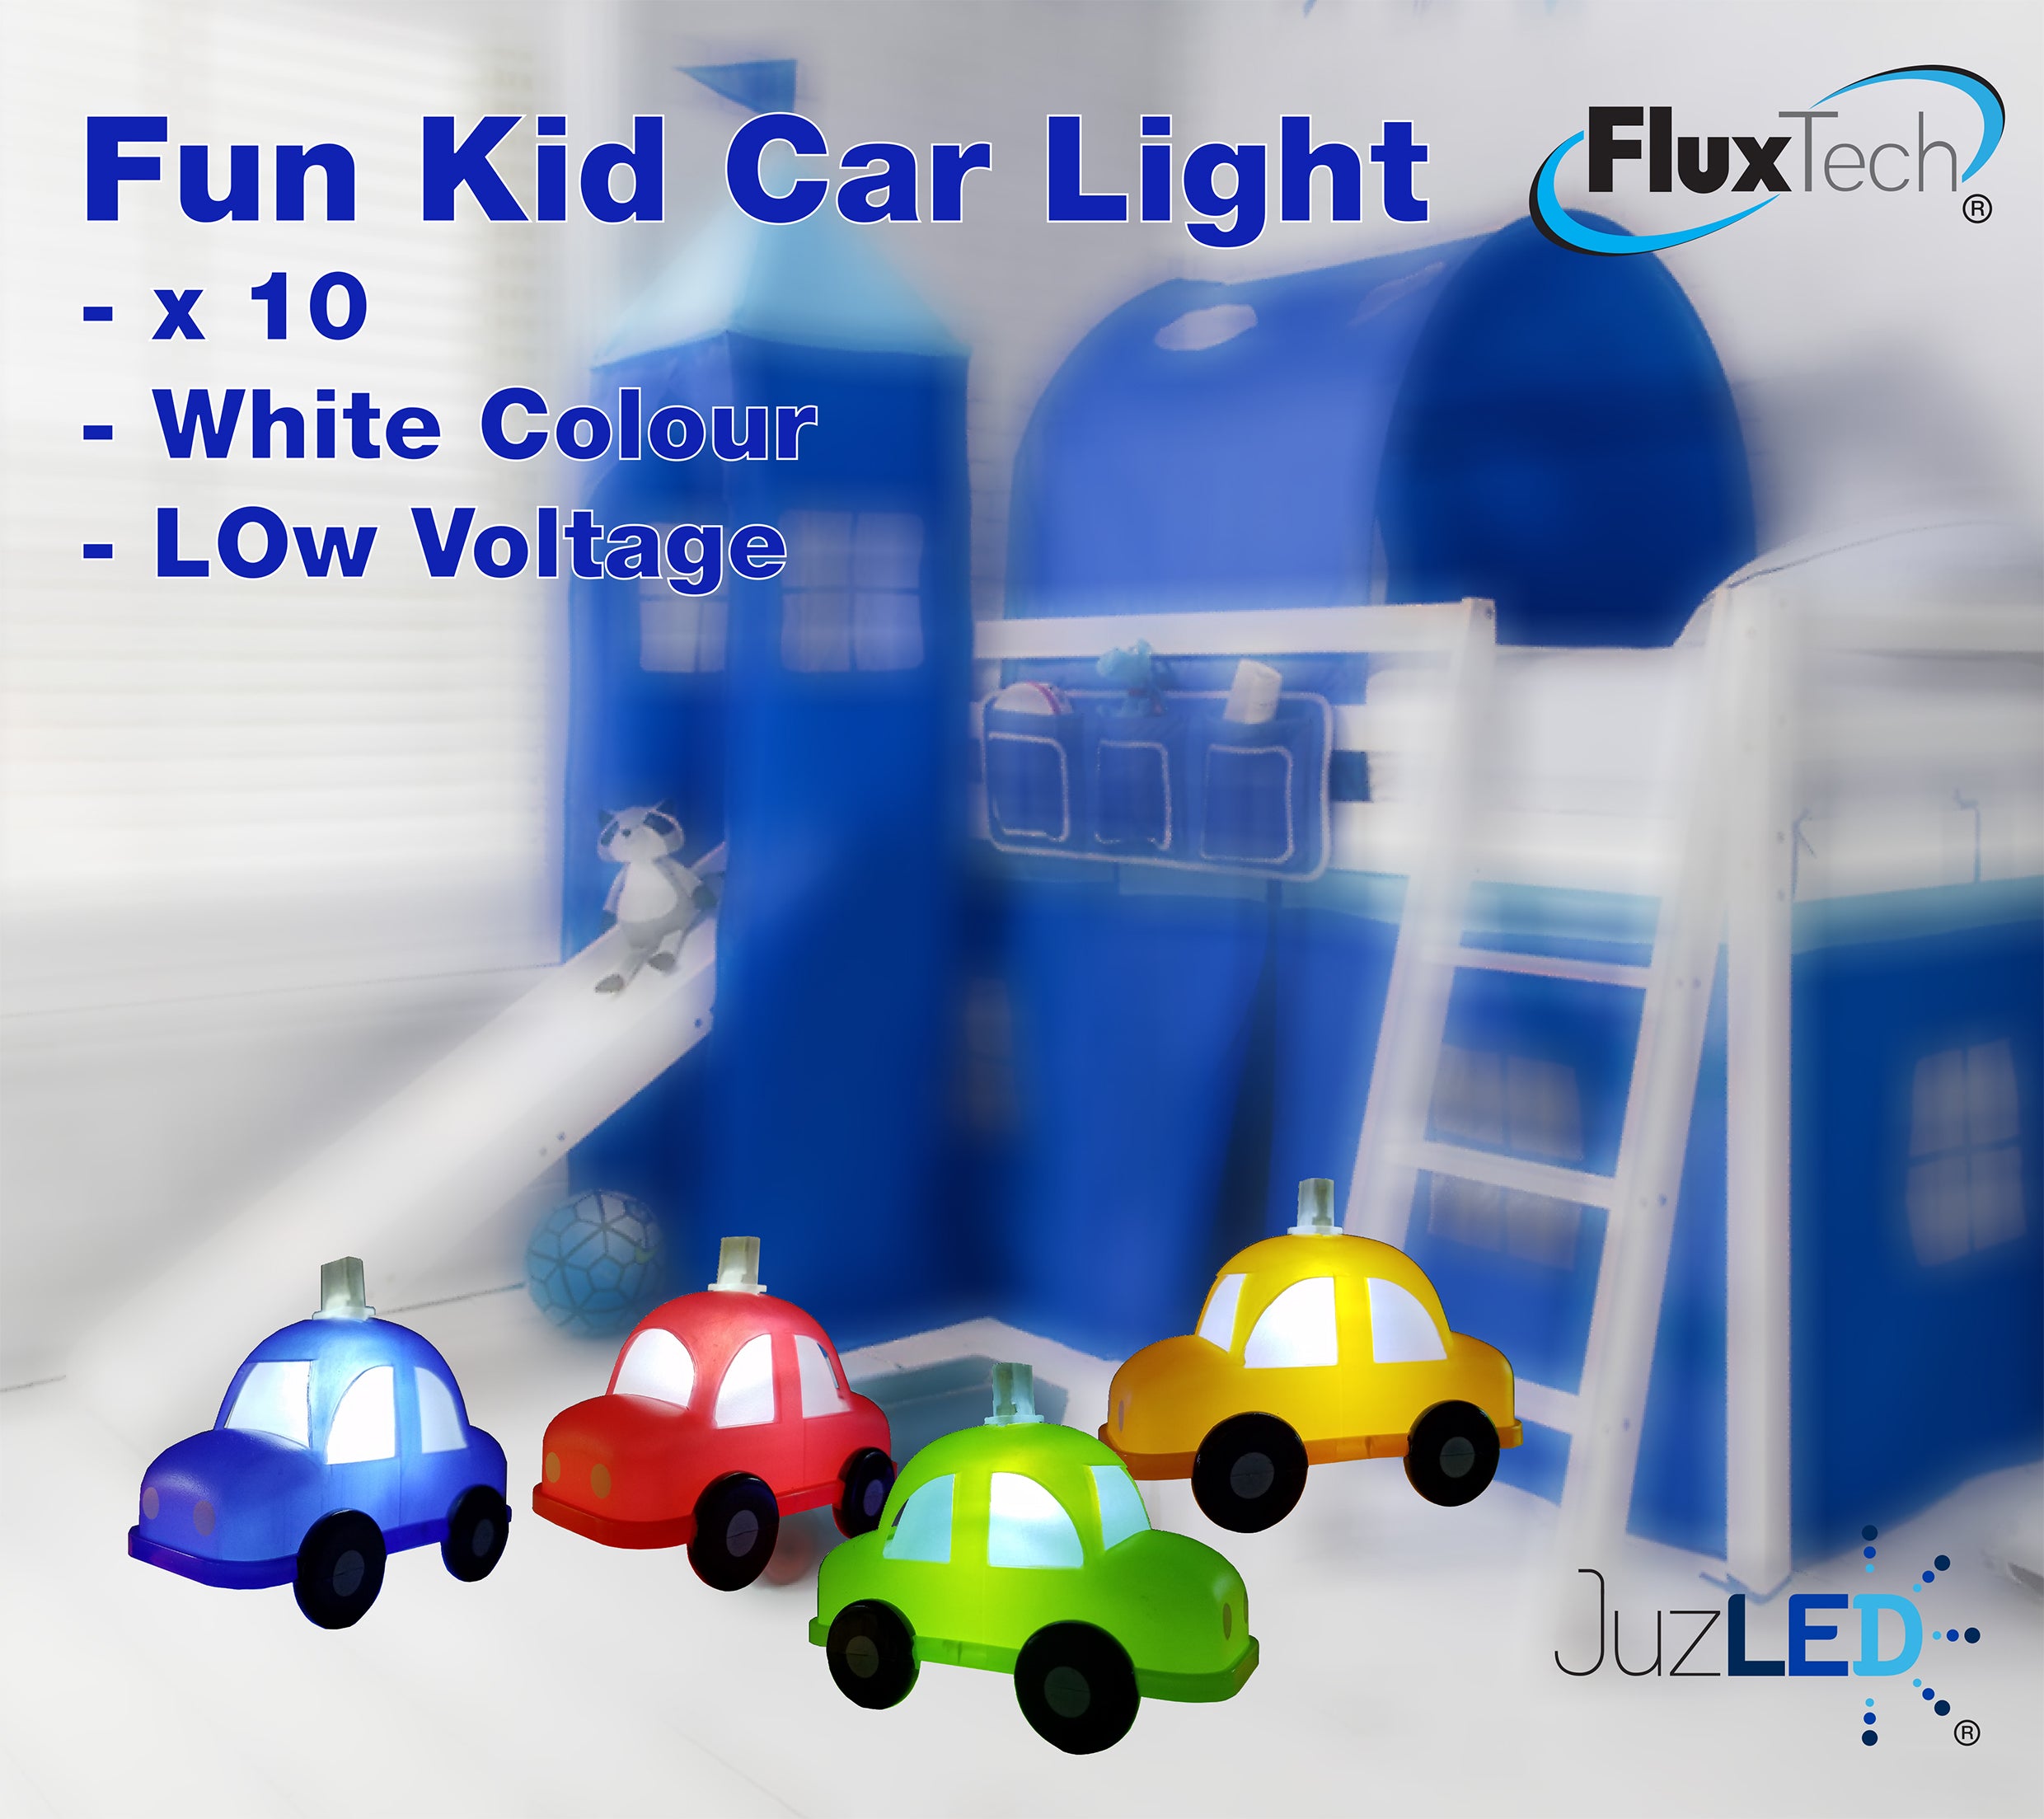 FluxTech - Fantastic Children Fun Car 10 x White Colour LED String Lights JustLED – Low Voltage Operated